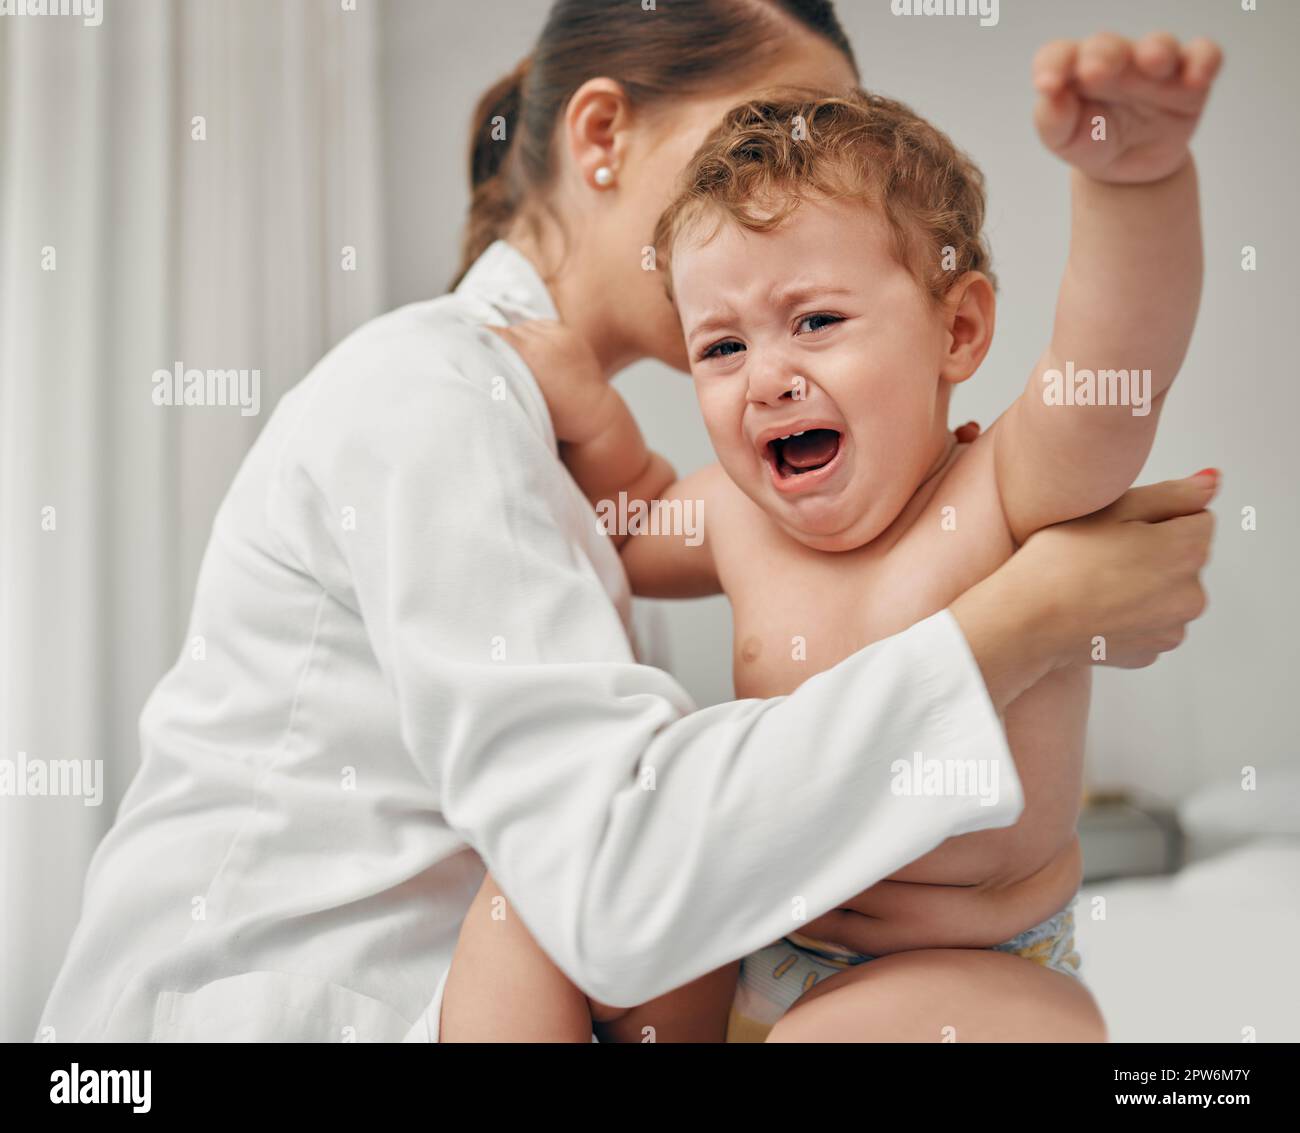 Were almost done. a little baby crying while being examined by a doctor Stock Photo